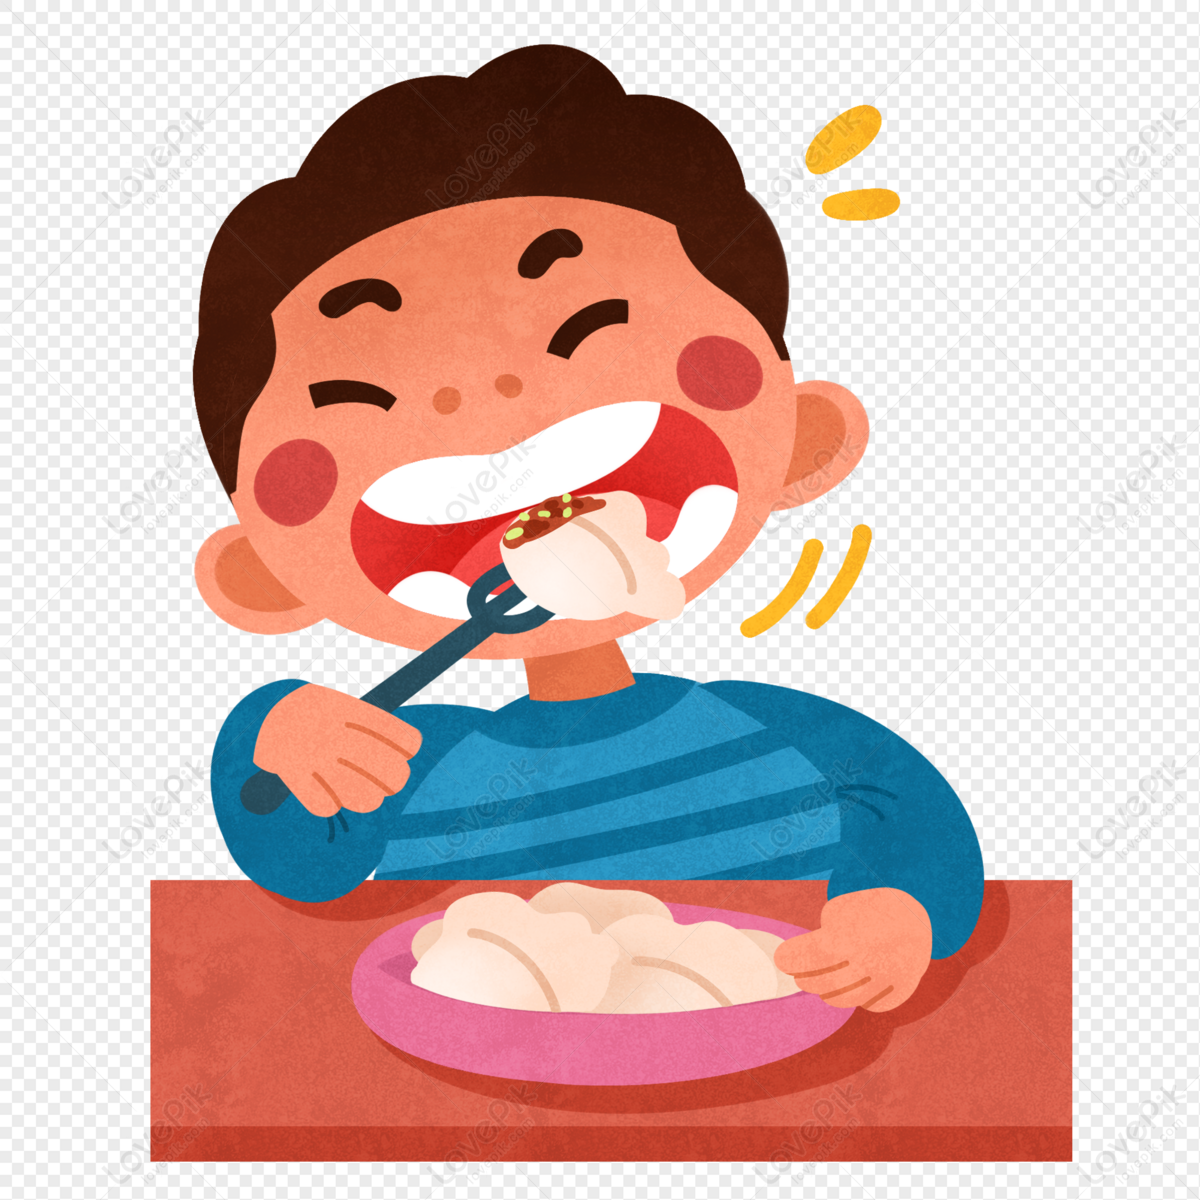 Eating Dumplings For Children PNG Hd Transparent Image And Clipart Image  For Free Download - Lovepik | 401641244